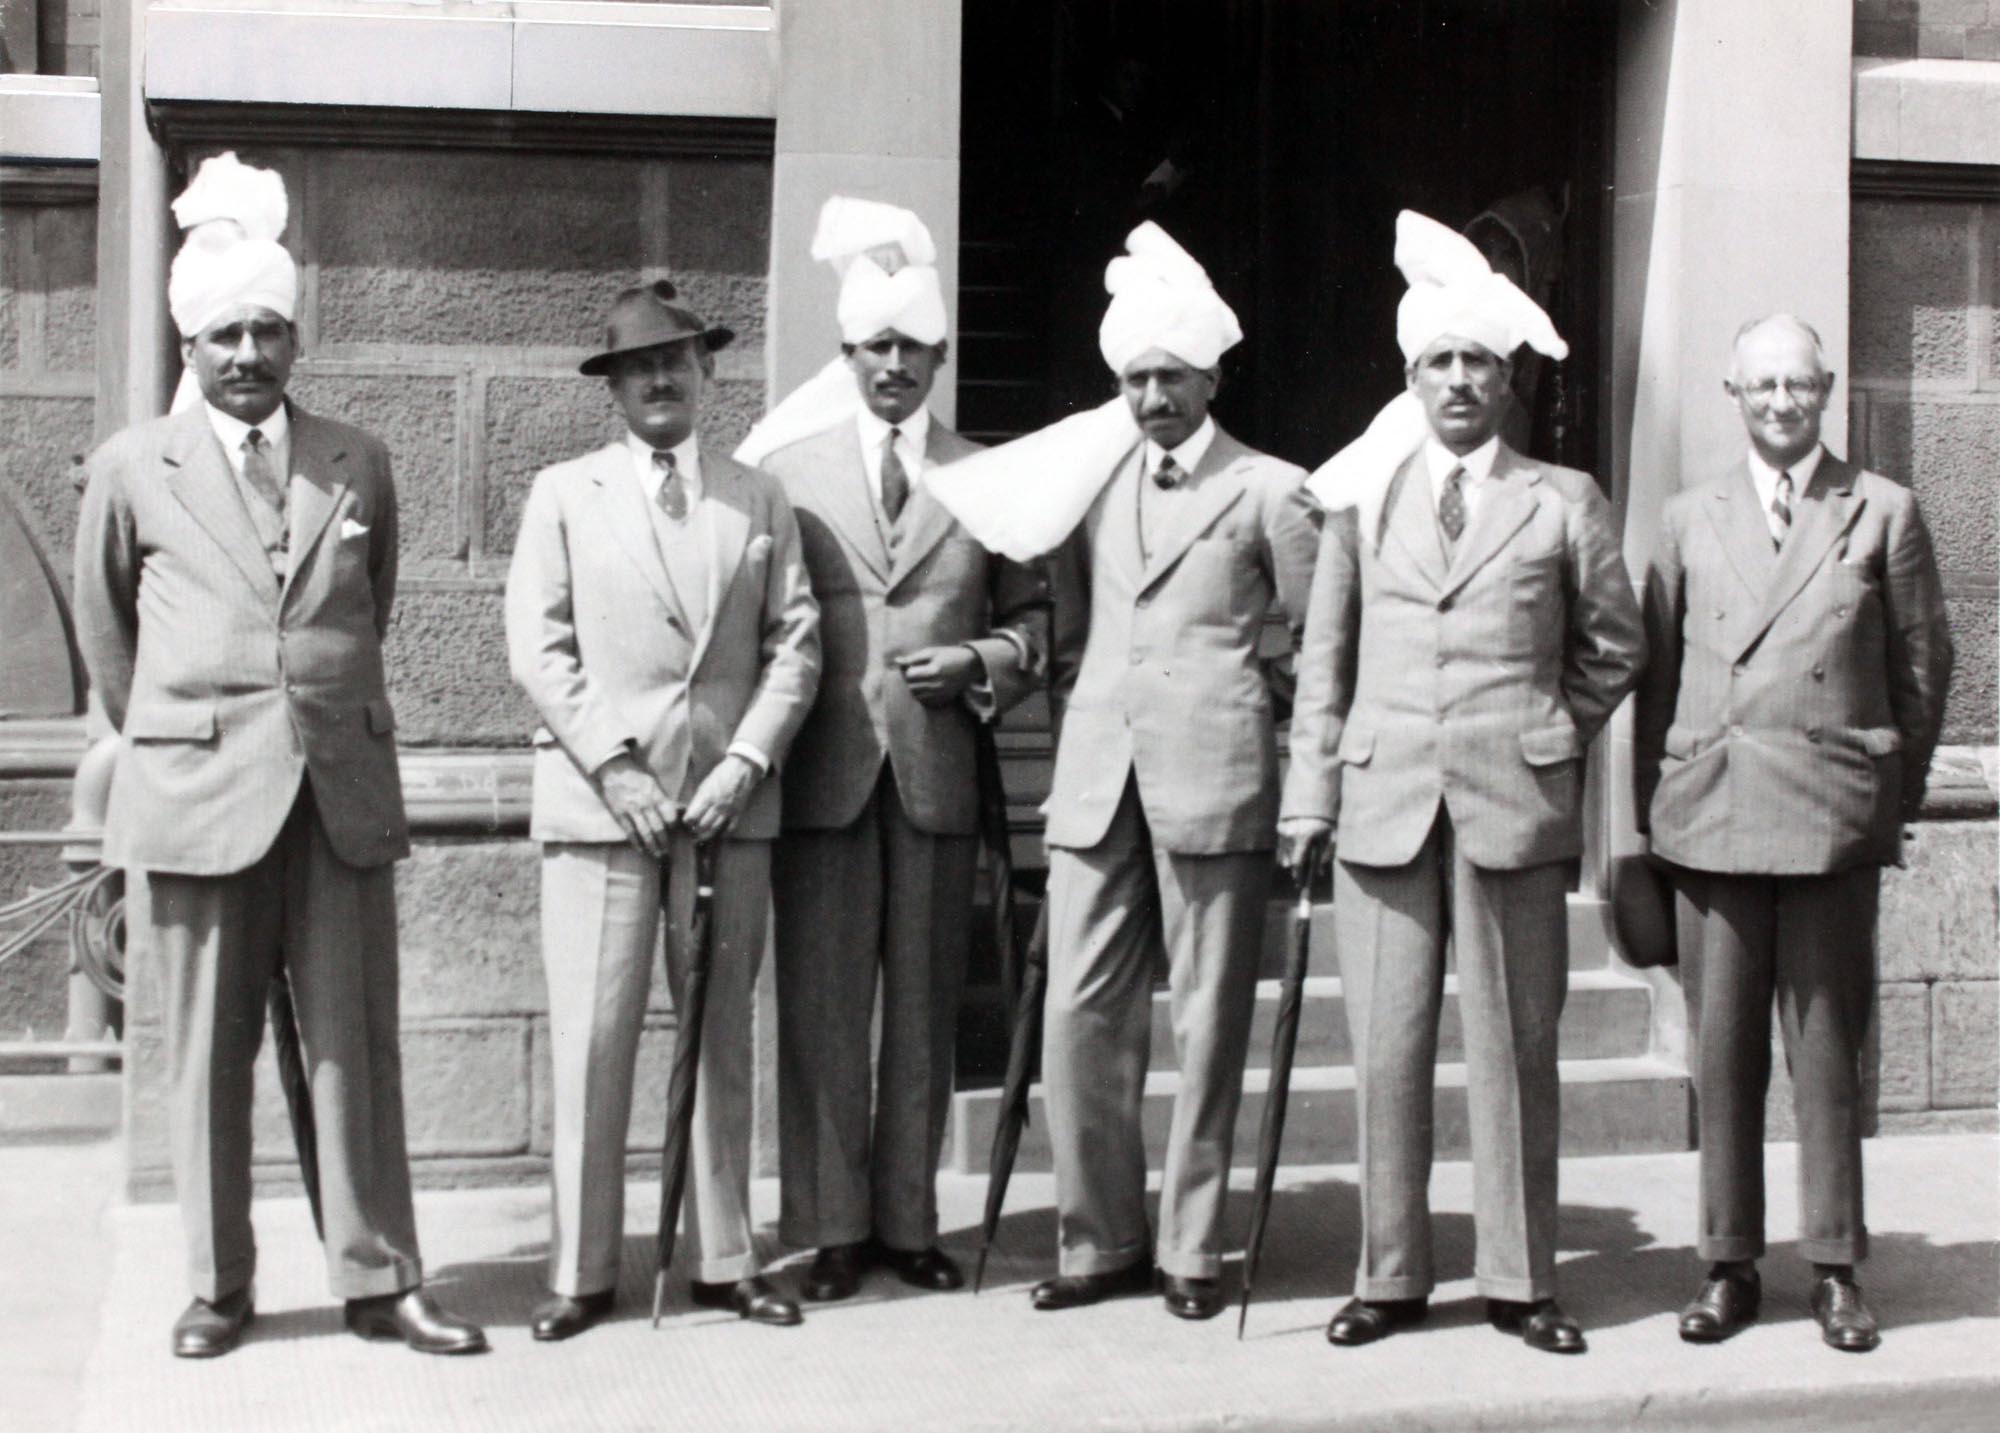 Photograph of Indian visitors to Corah factory, 1939 - Manufacturing Pasts (University of Leicester)